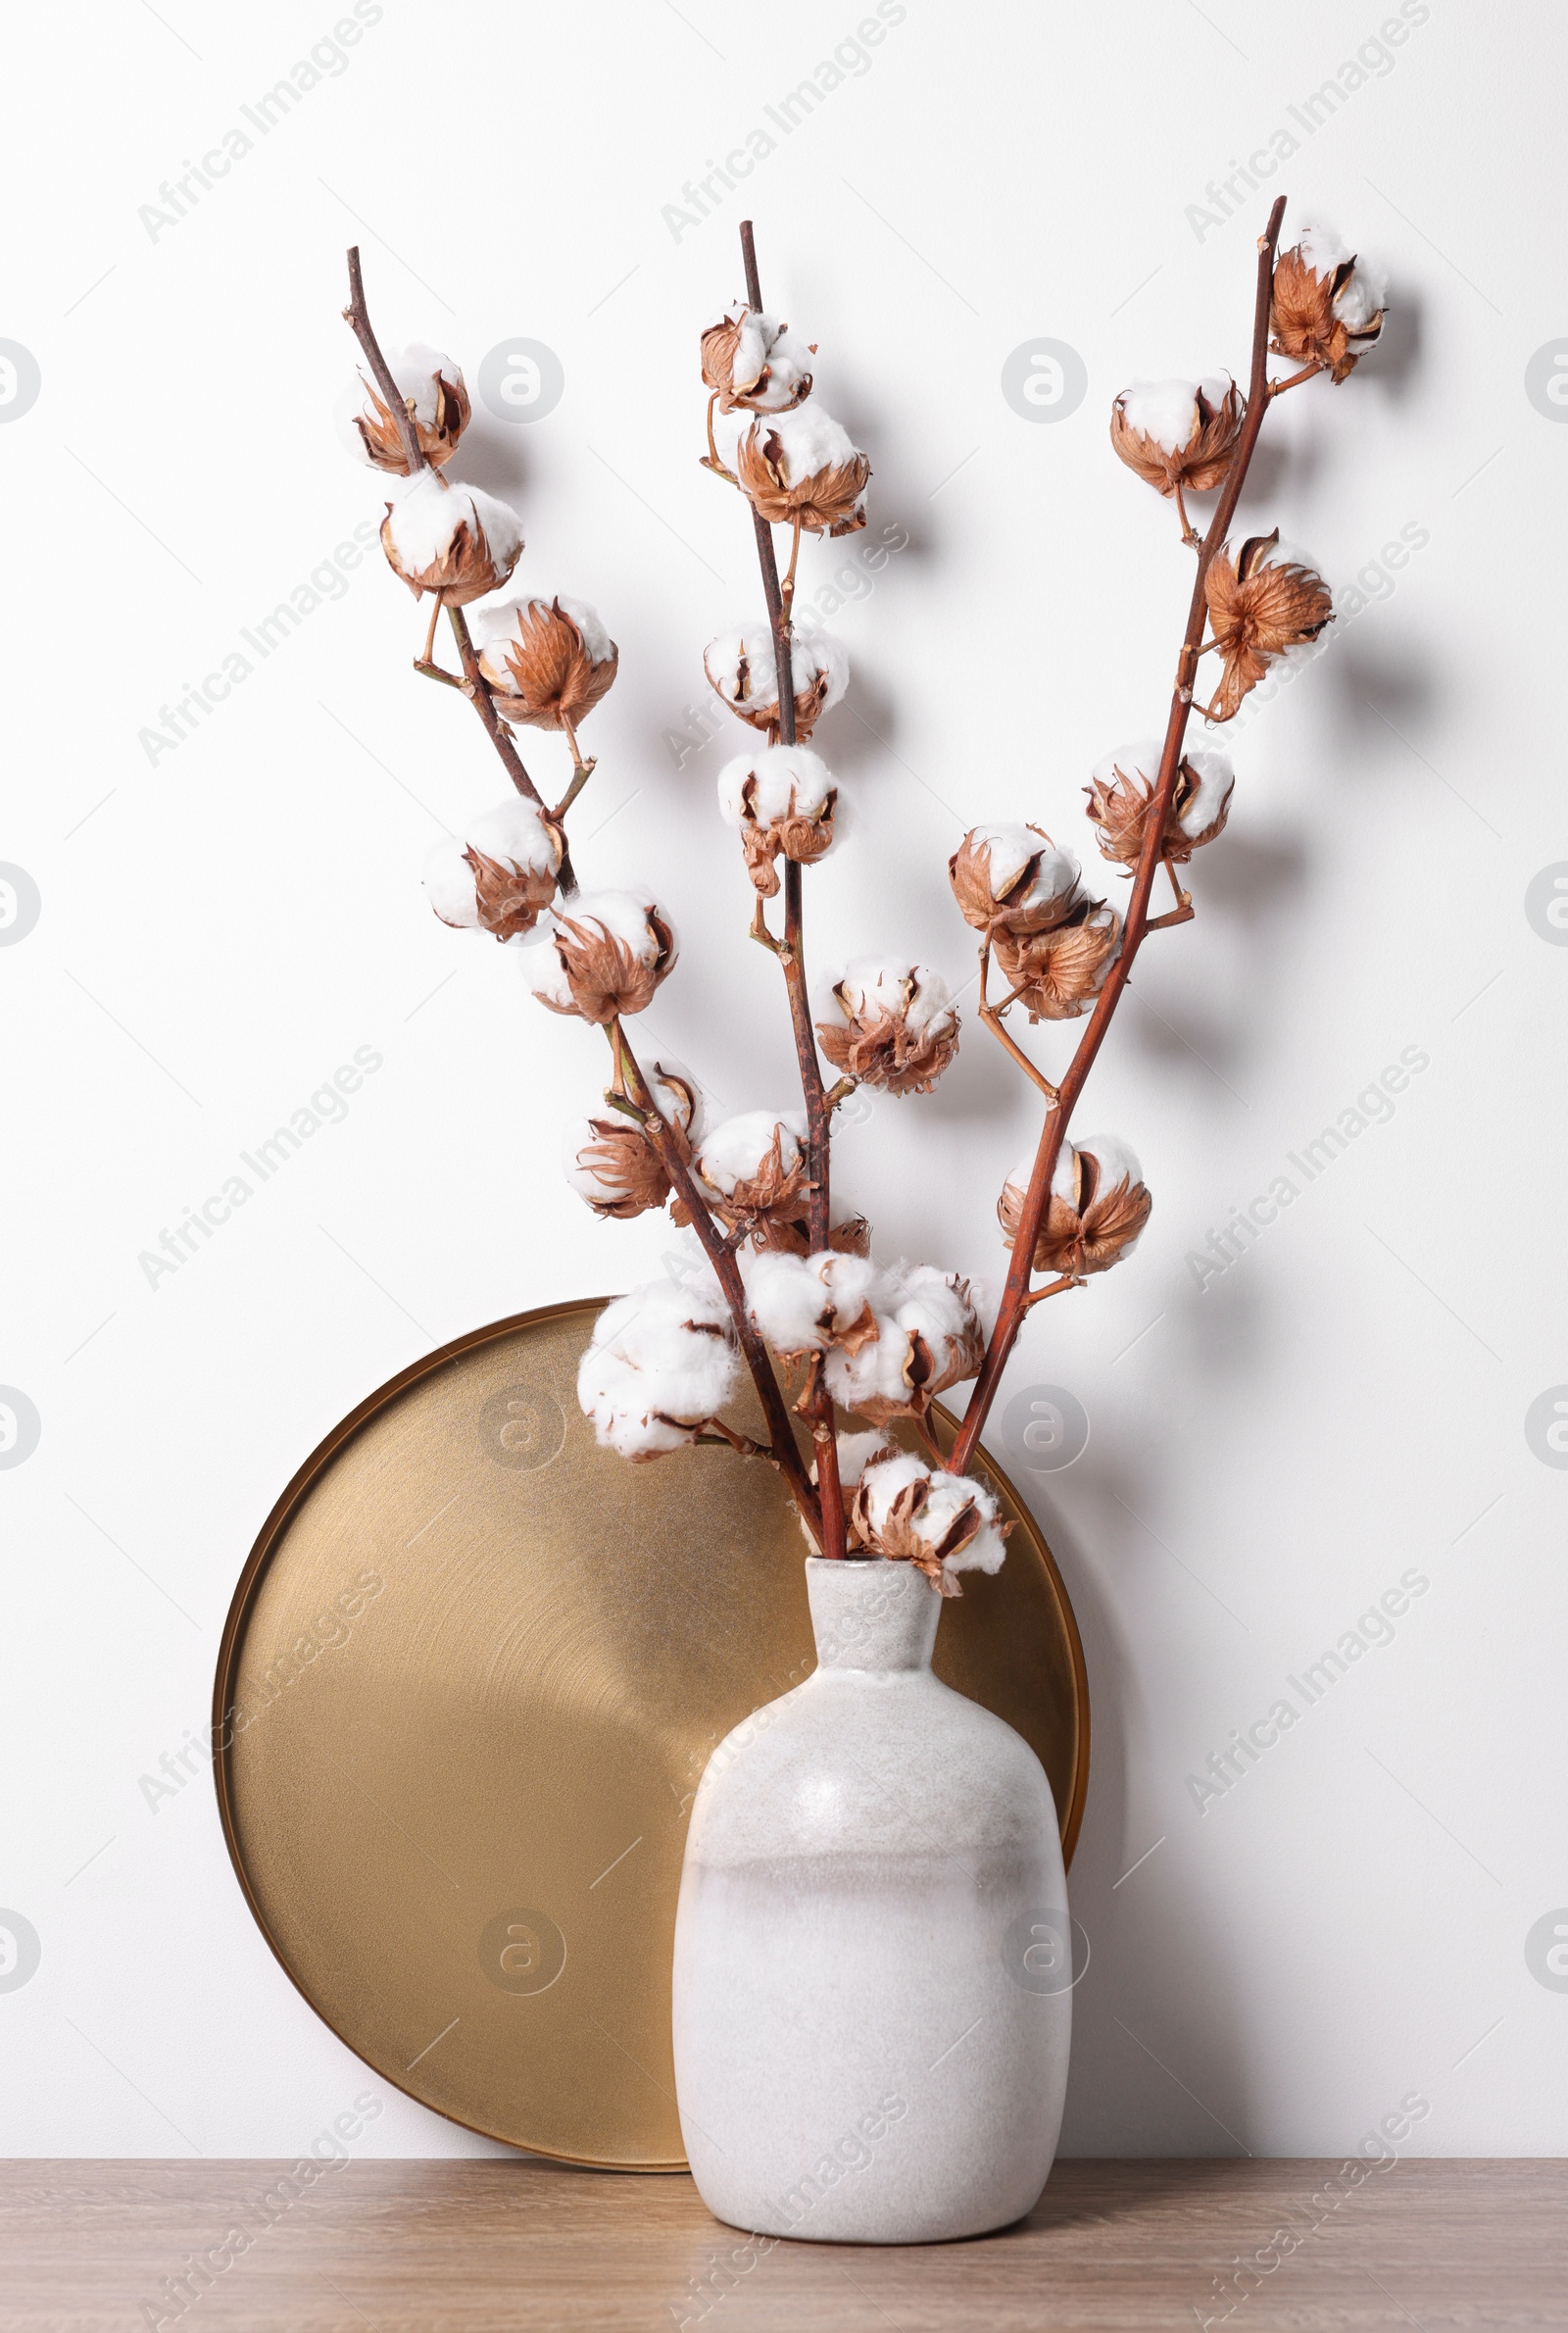 Photo of Vase with bouquet of cotton branches on wooden table against white background